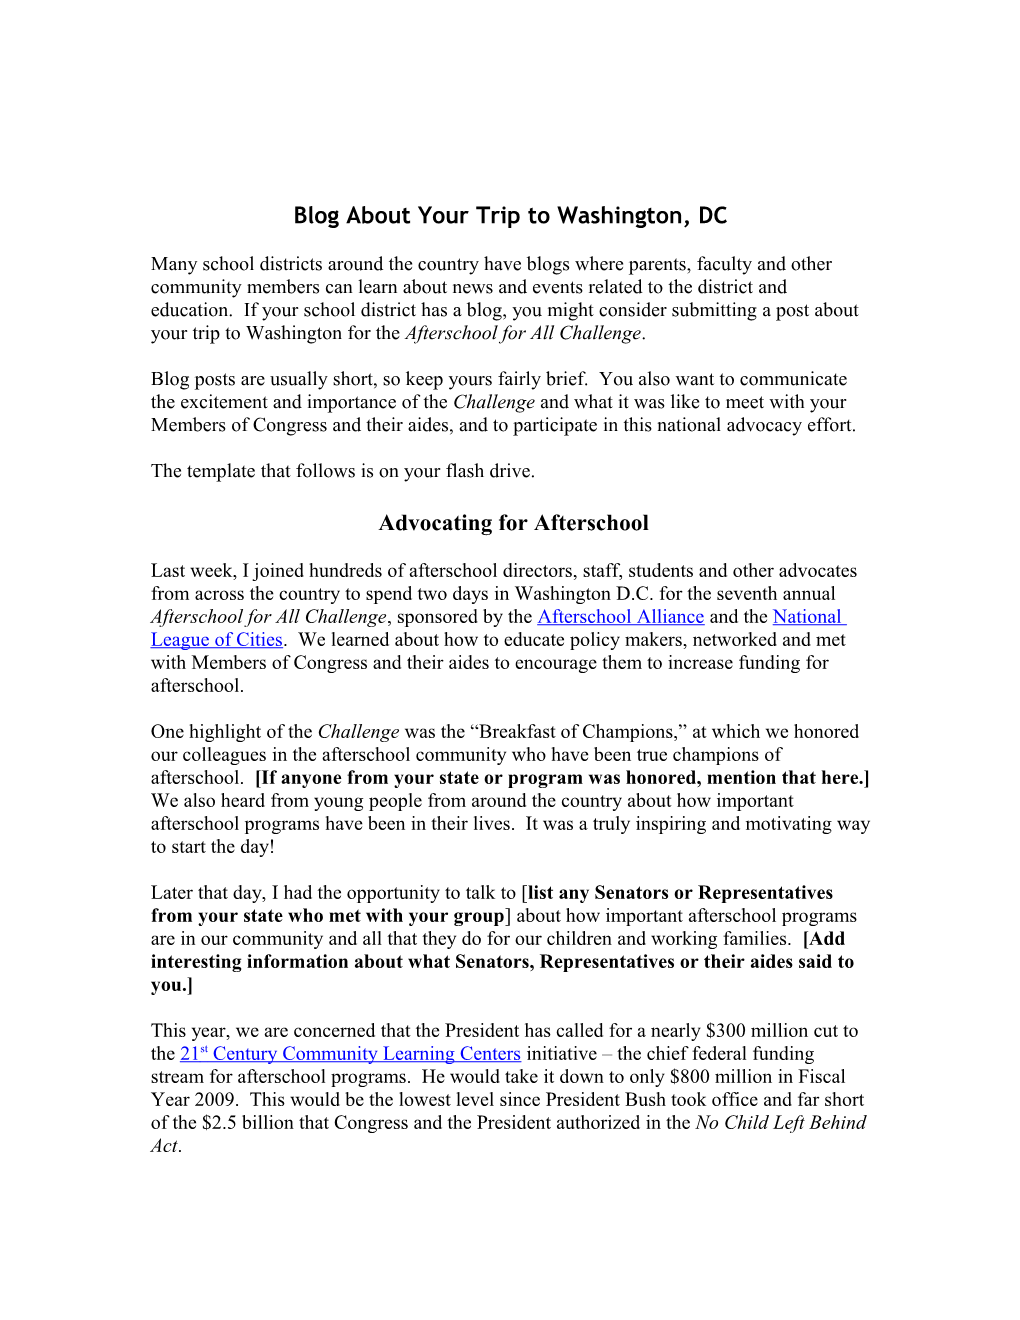 Send a News Release About Your Trip to Washington, DC